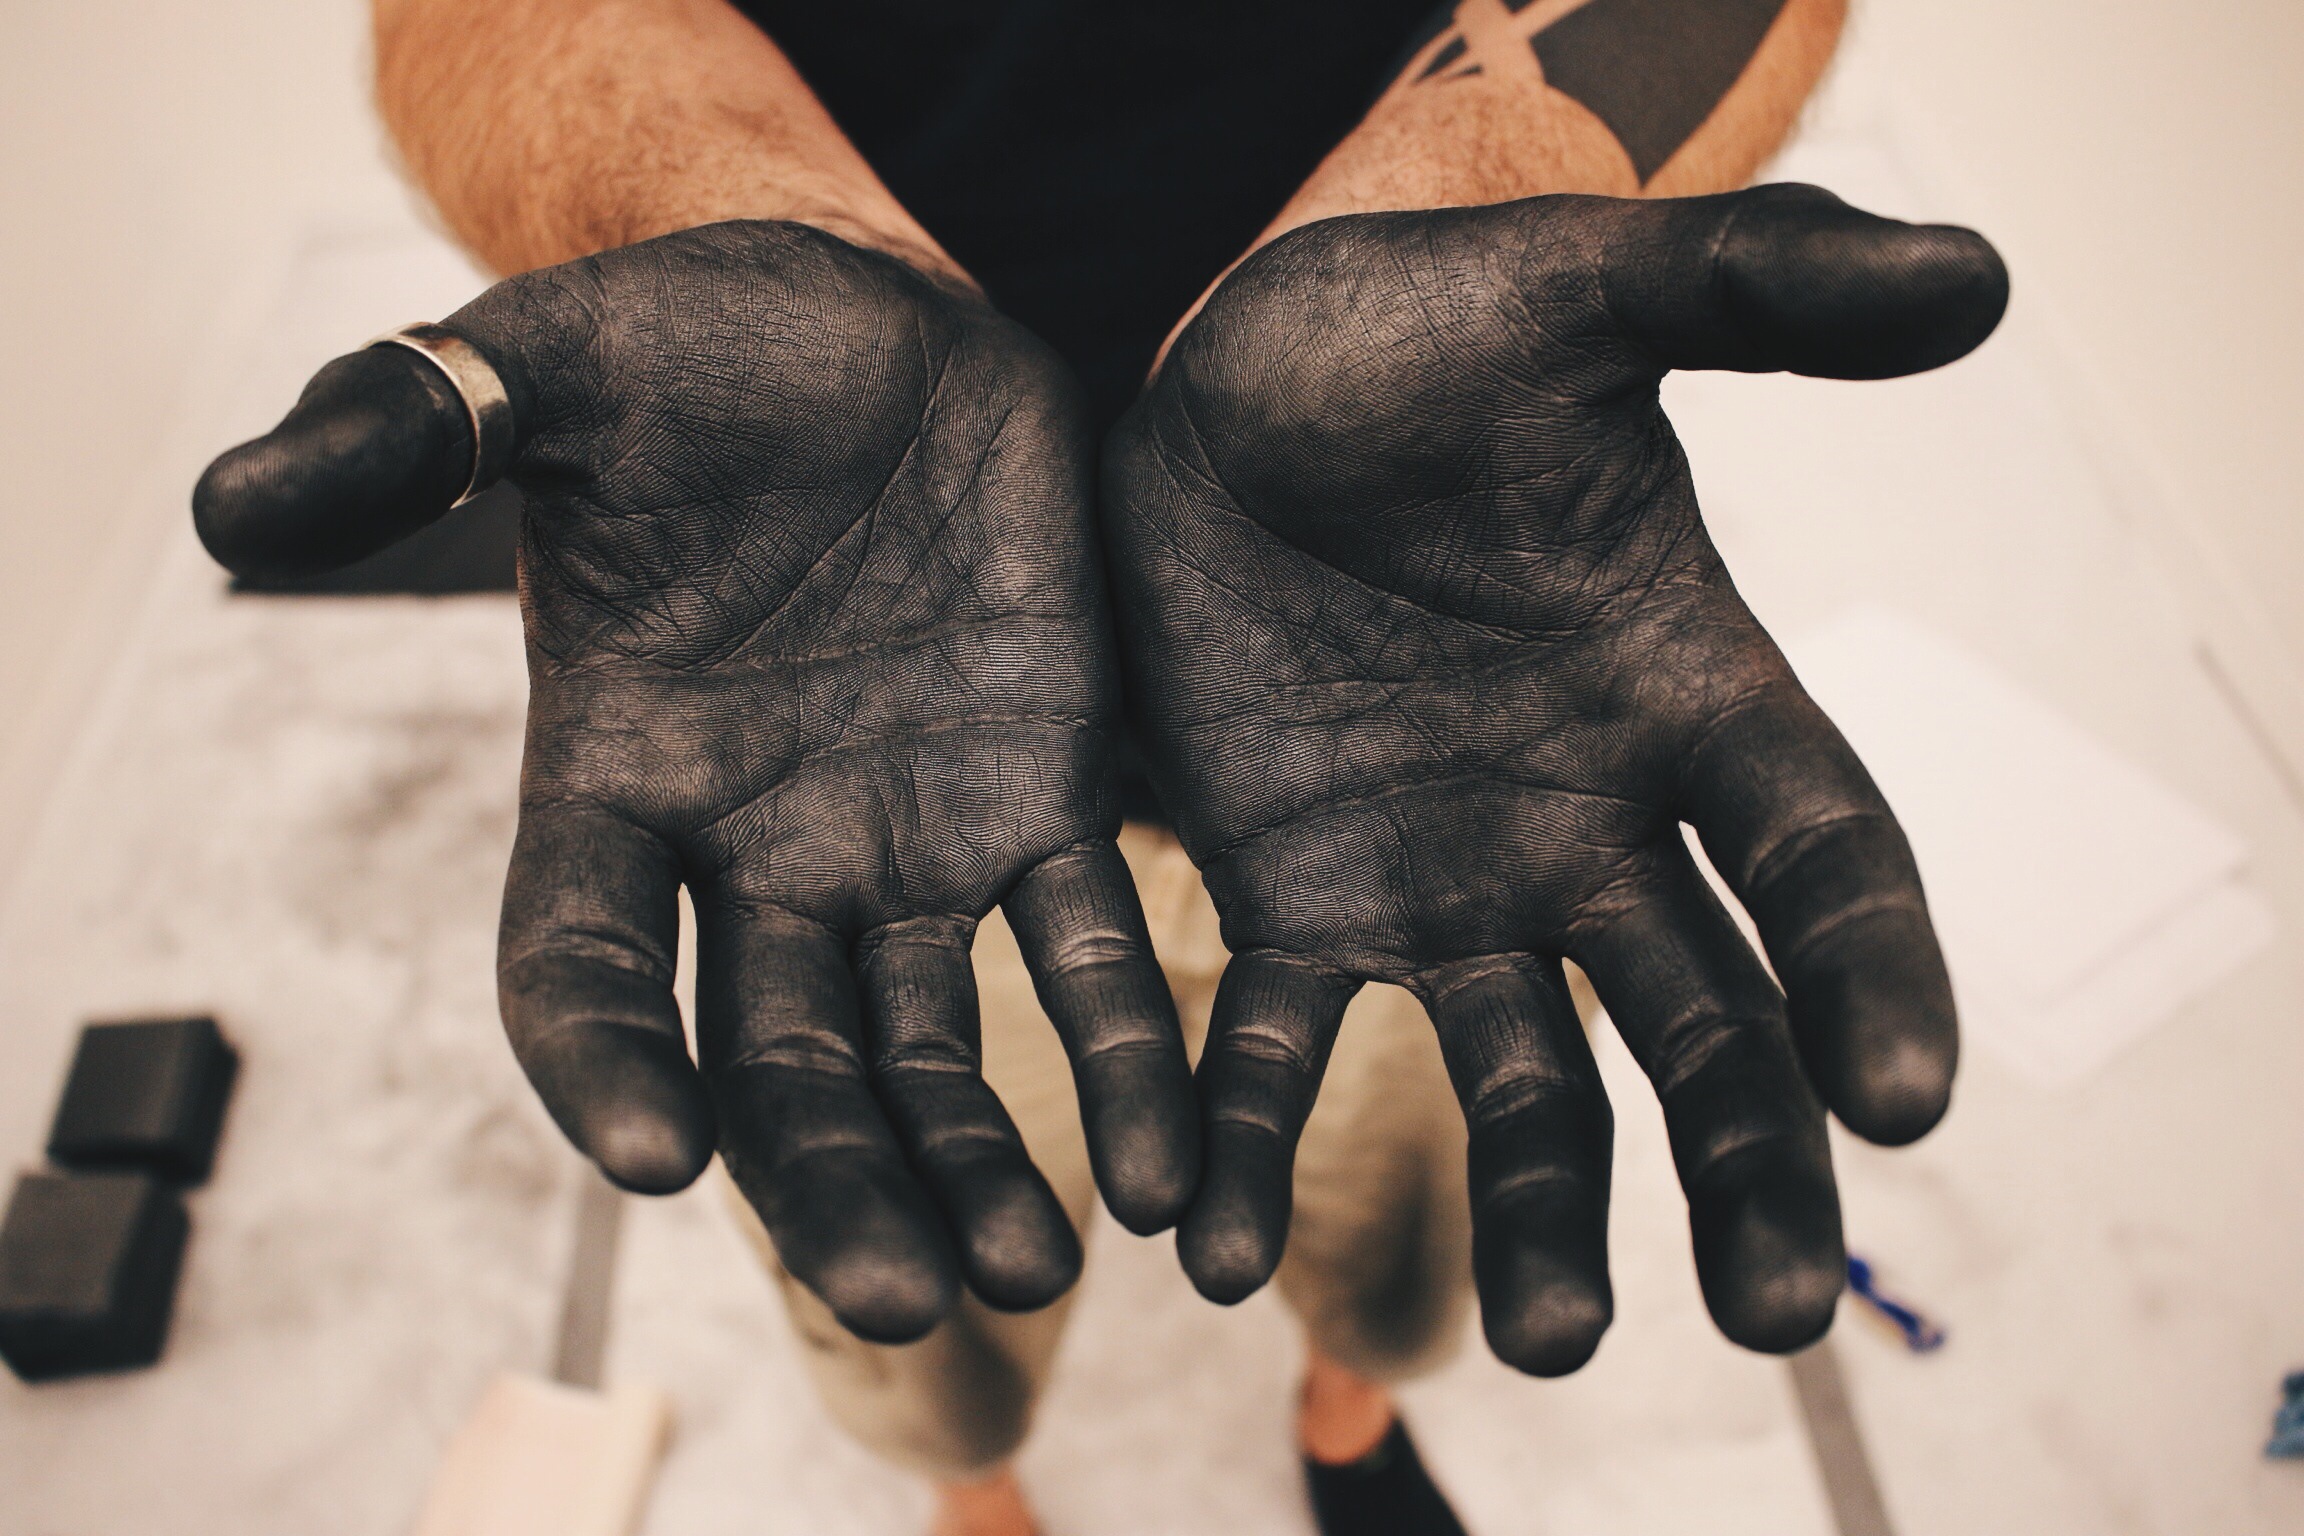  Hands covered by black graphite 